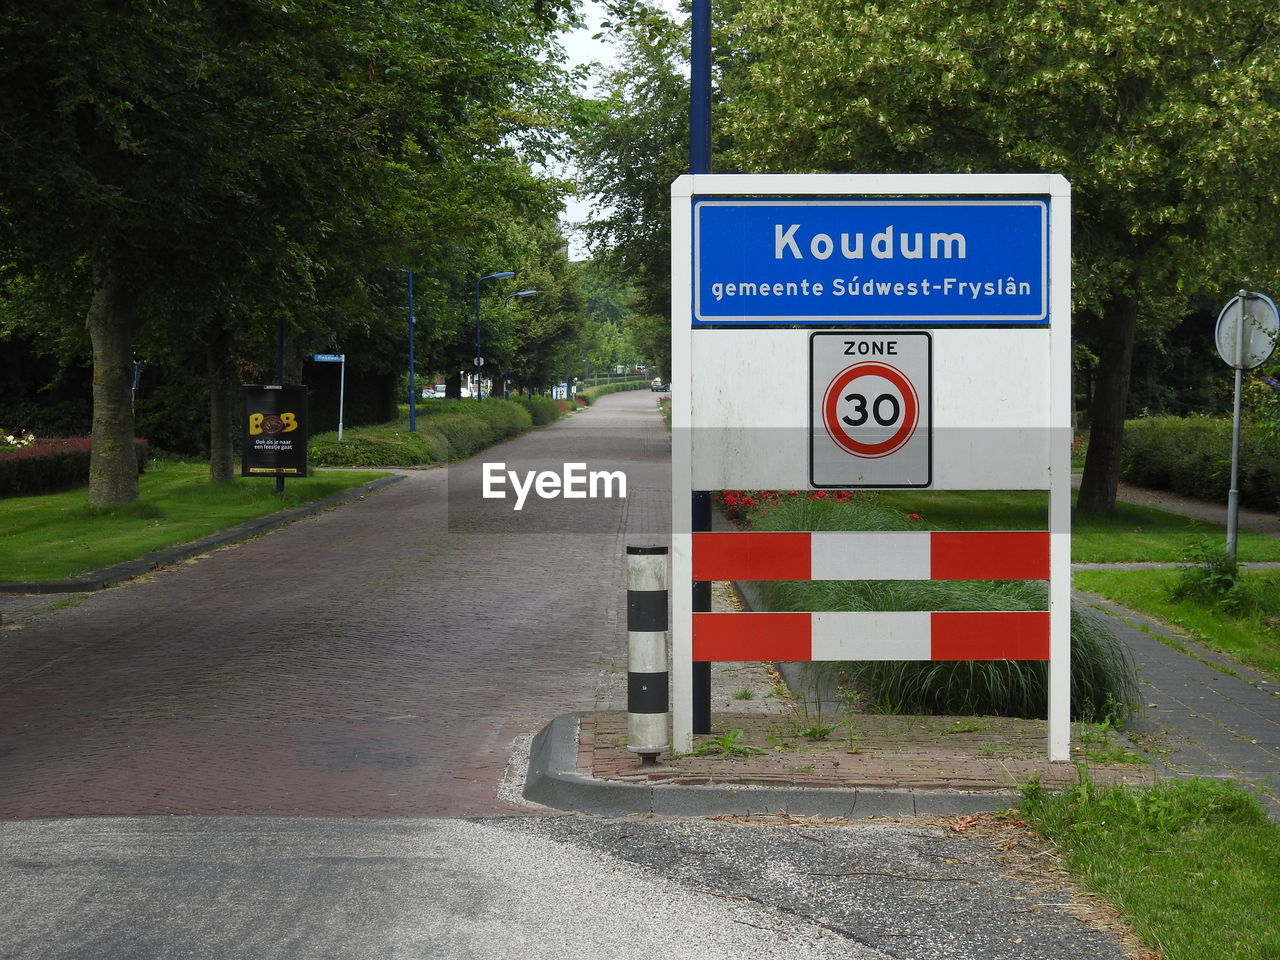 Road sign in park